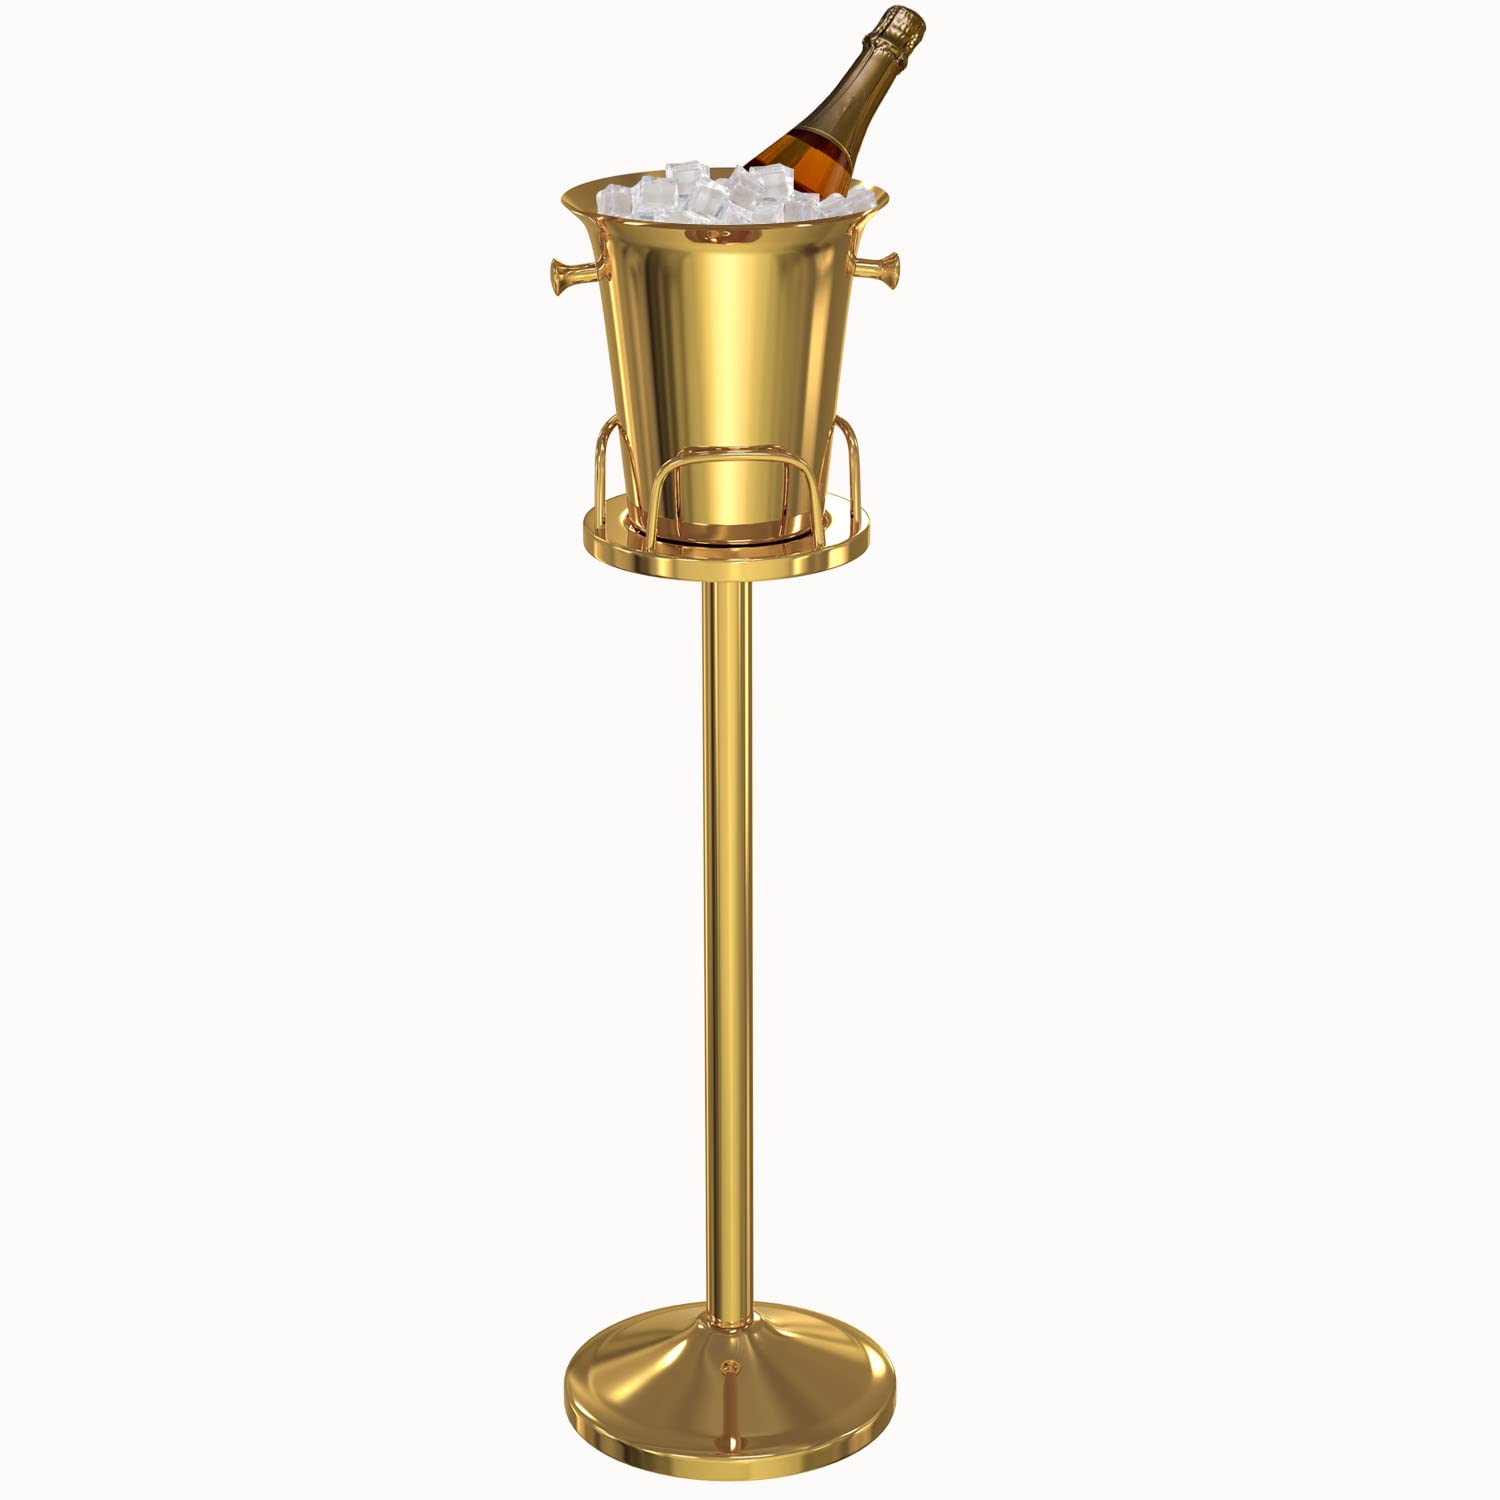 Champagne Ice Bucket with Stand,Wine Ice Bucket with Stand 201 Stainless Steel 5L Standing Ice Bucket 12Lb Hammered Tall Ice Bucket Stand for Party Bar Ktv Wedding Club Bbq Home (3Ft,Gold)